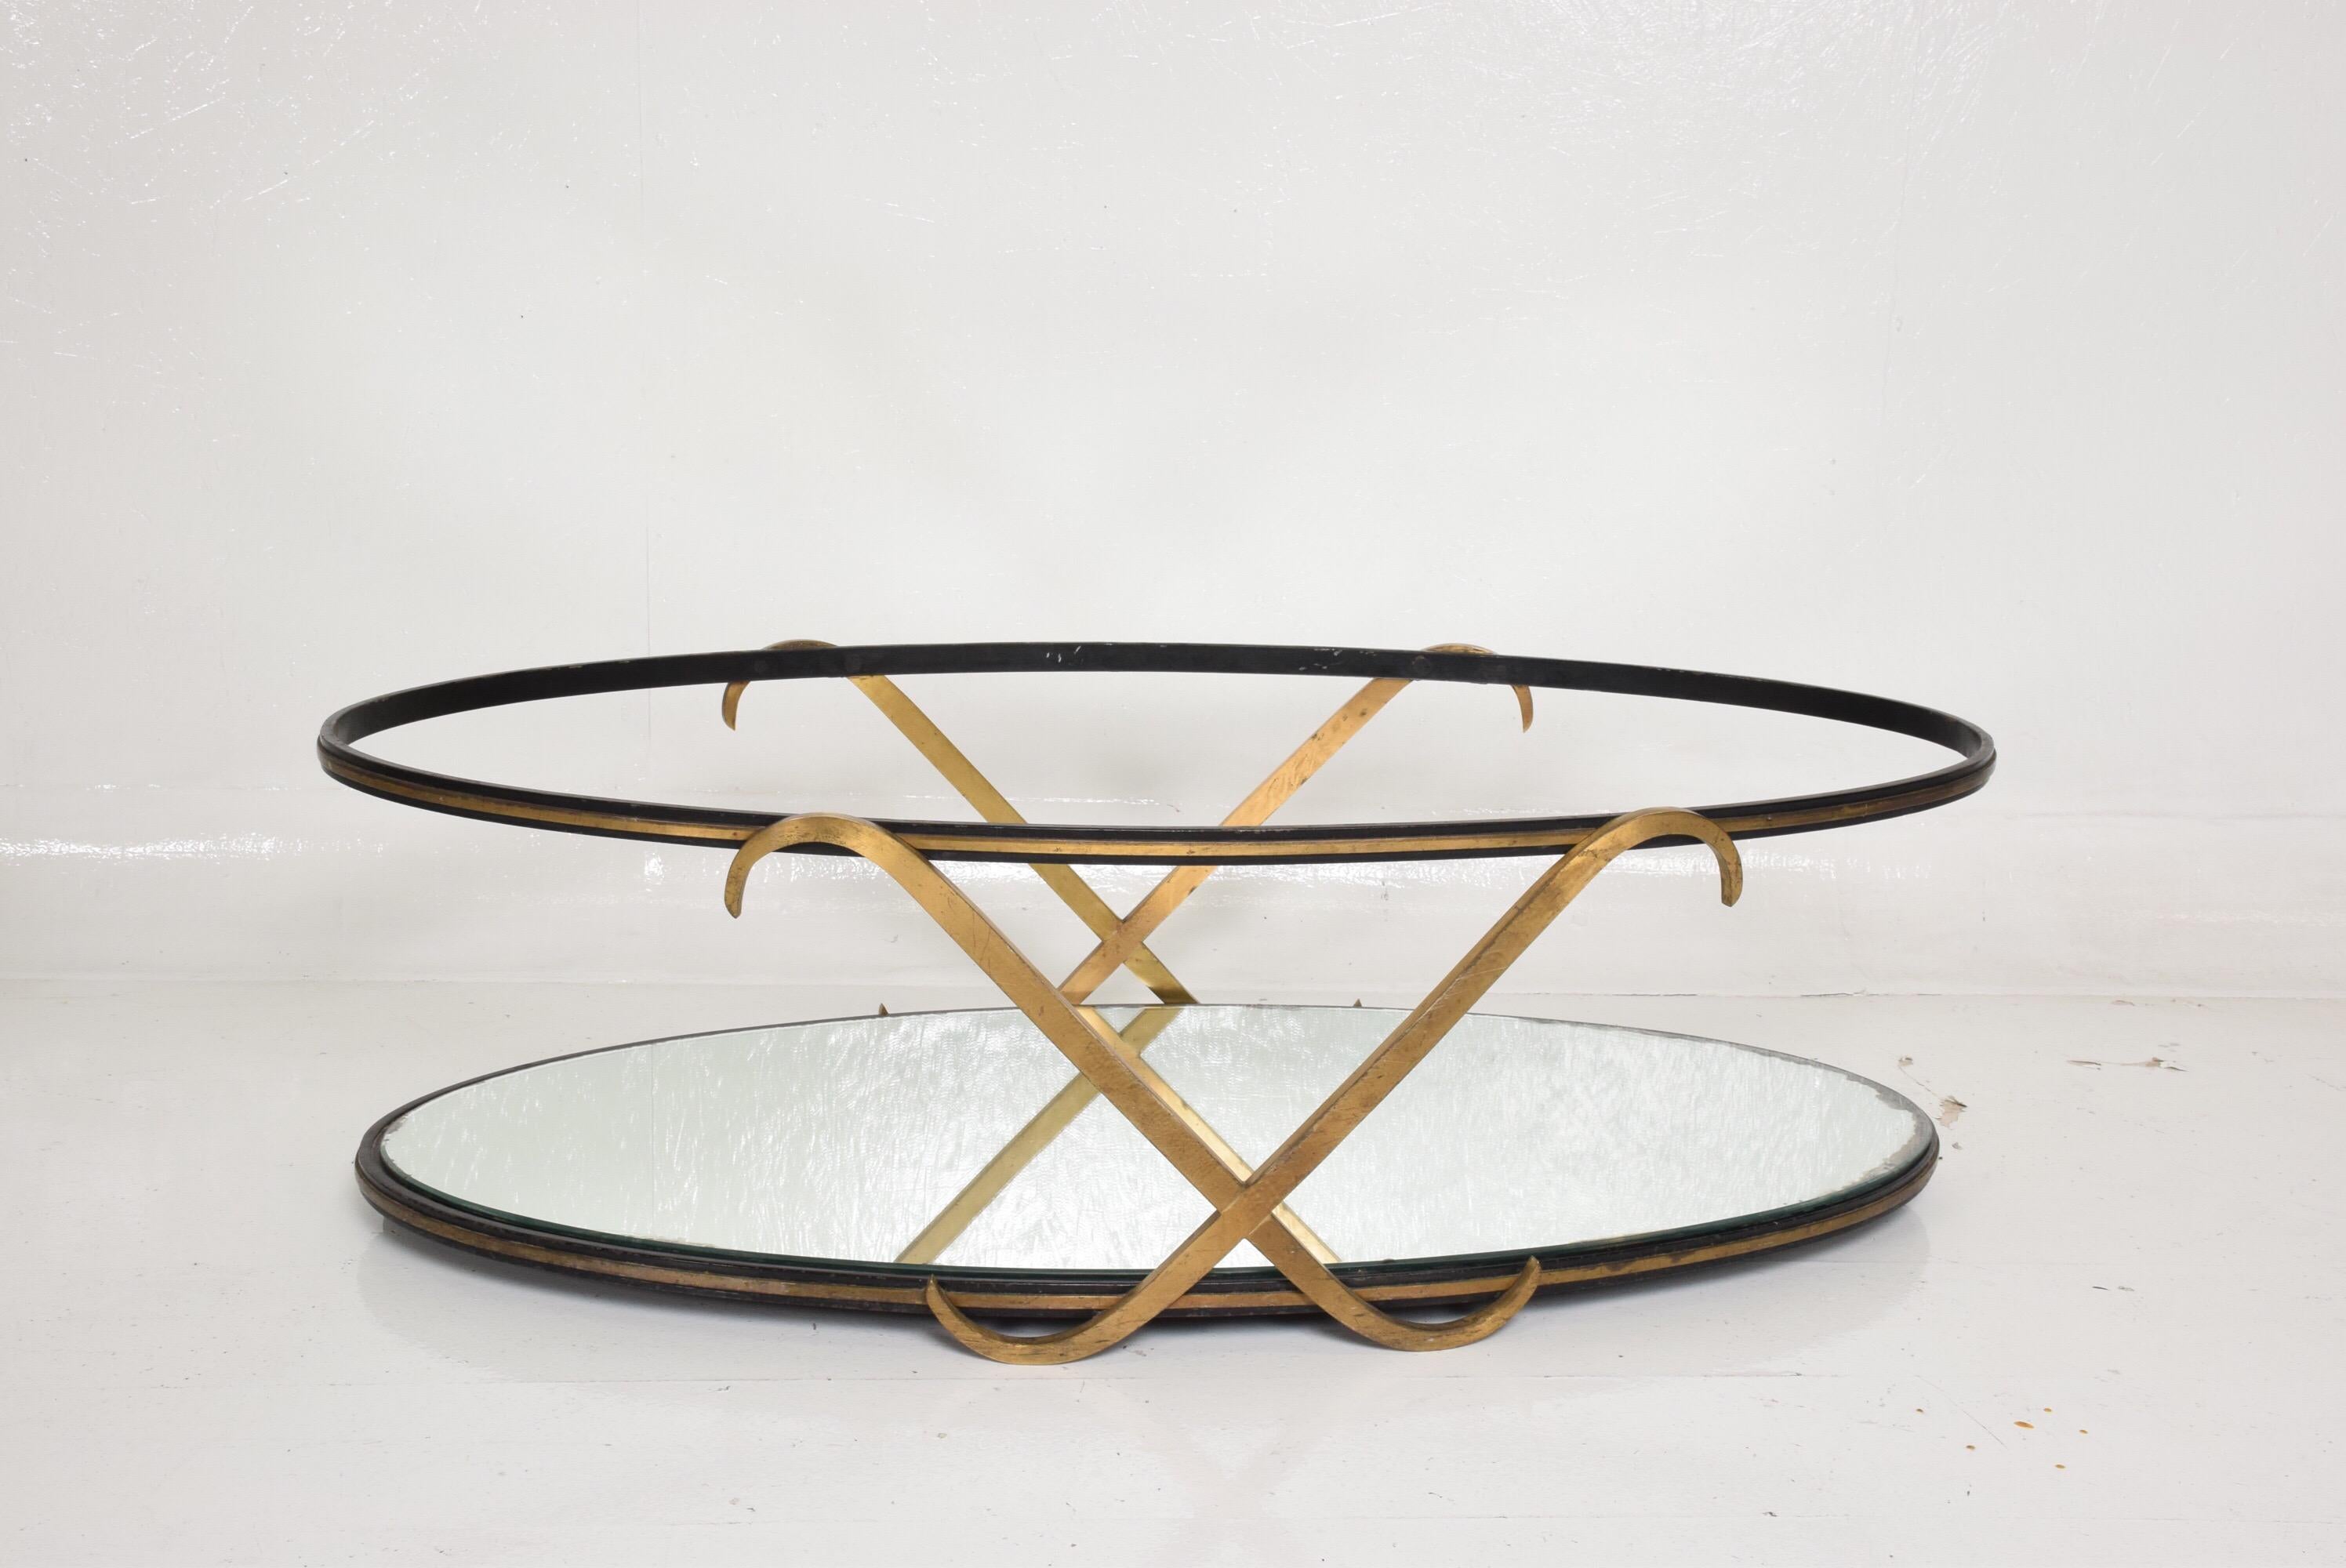 For your consideration, an oval coffee table after Arturo Pani, midcentury Mexican Modernist period.
Mexico, circa 1950s. Iron frame with brass 